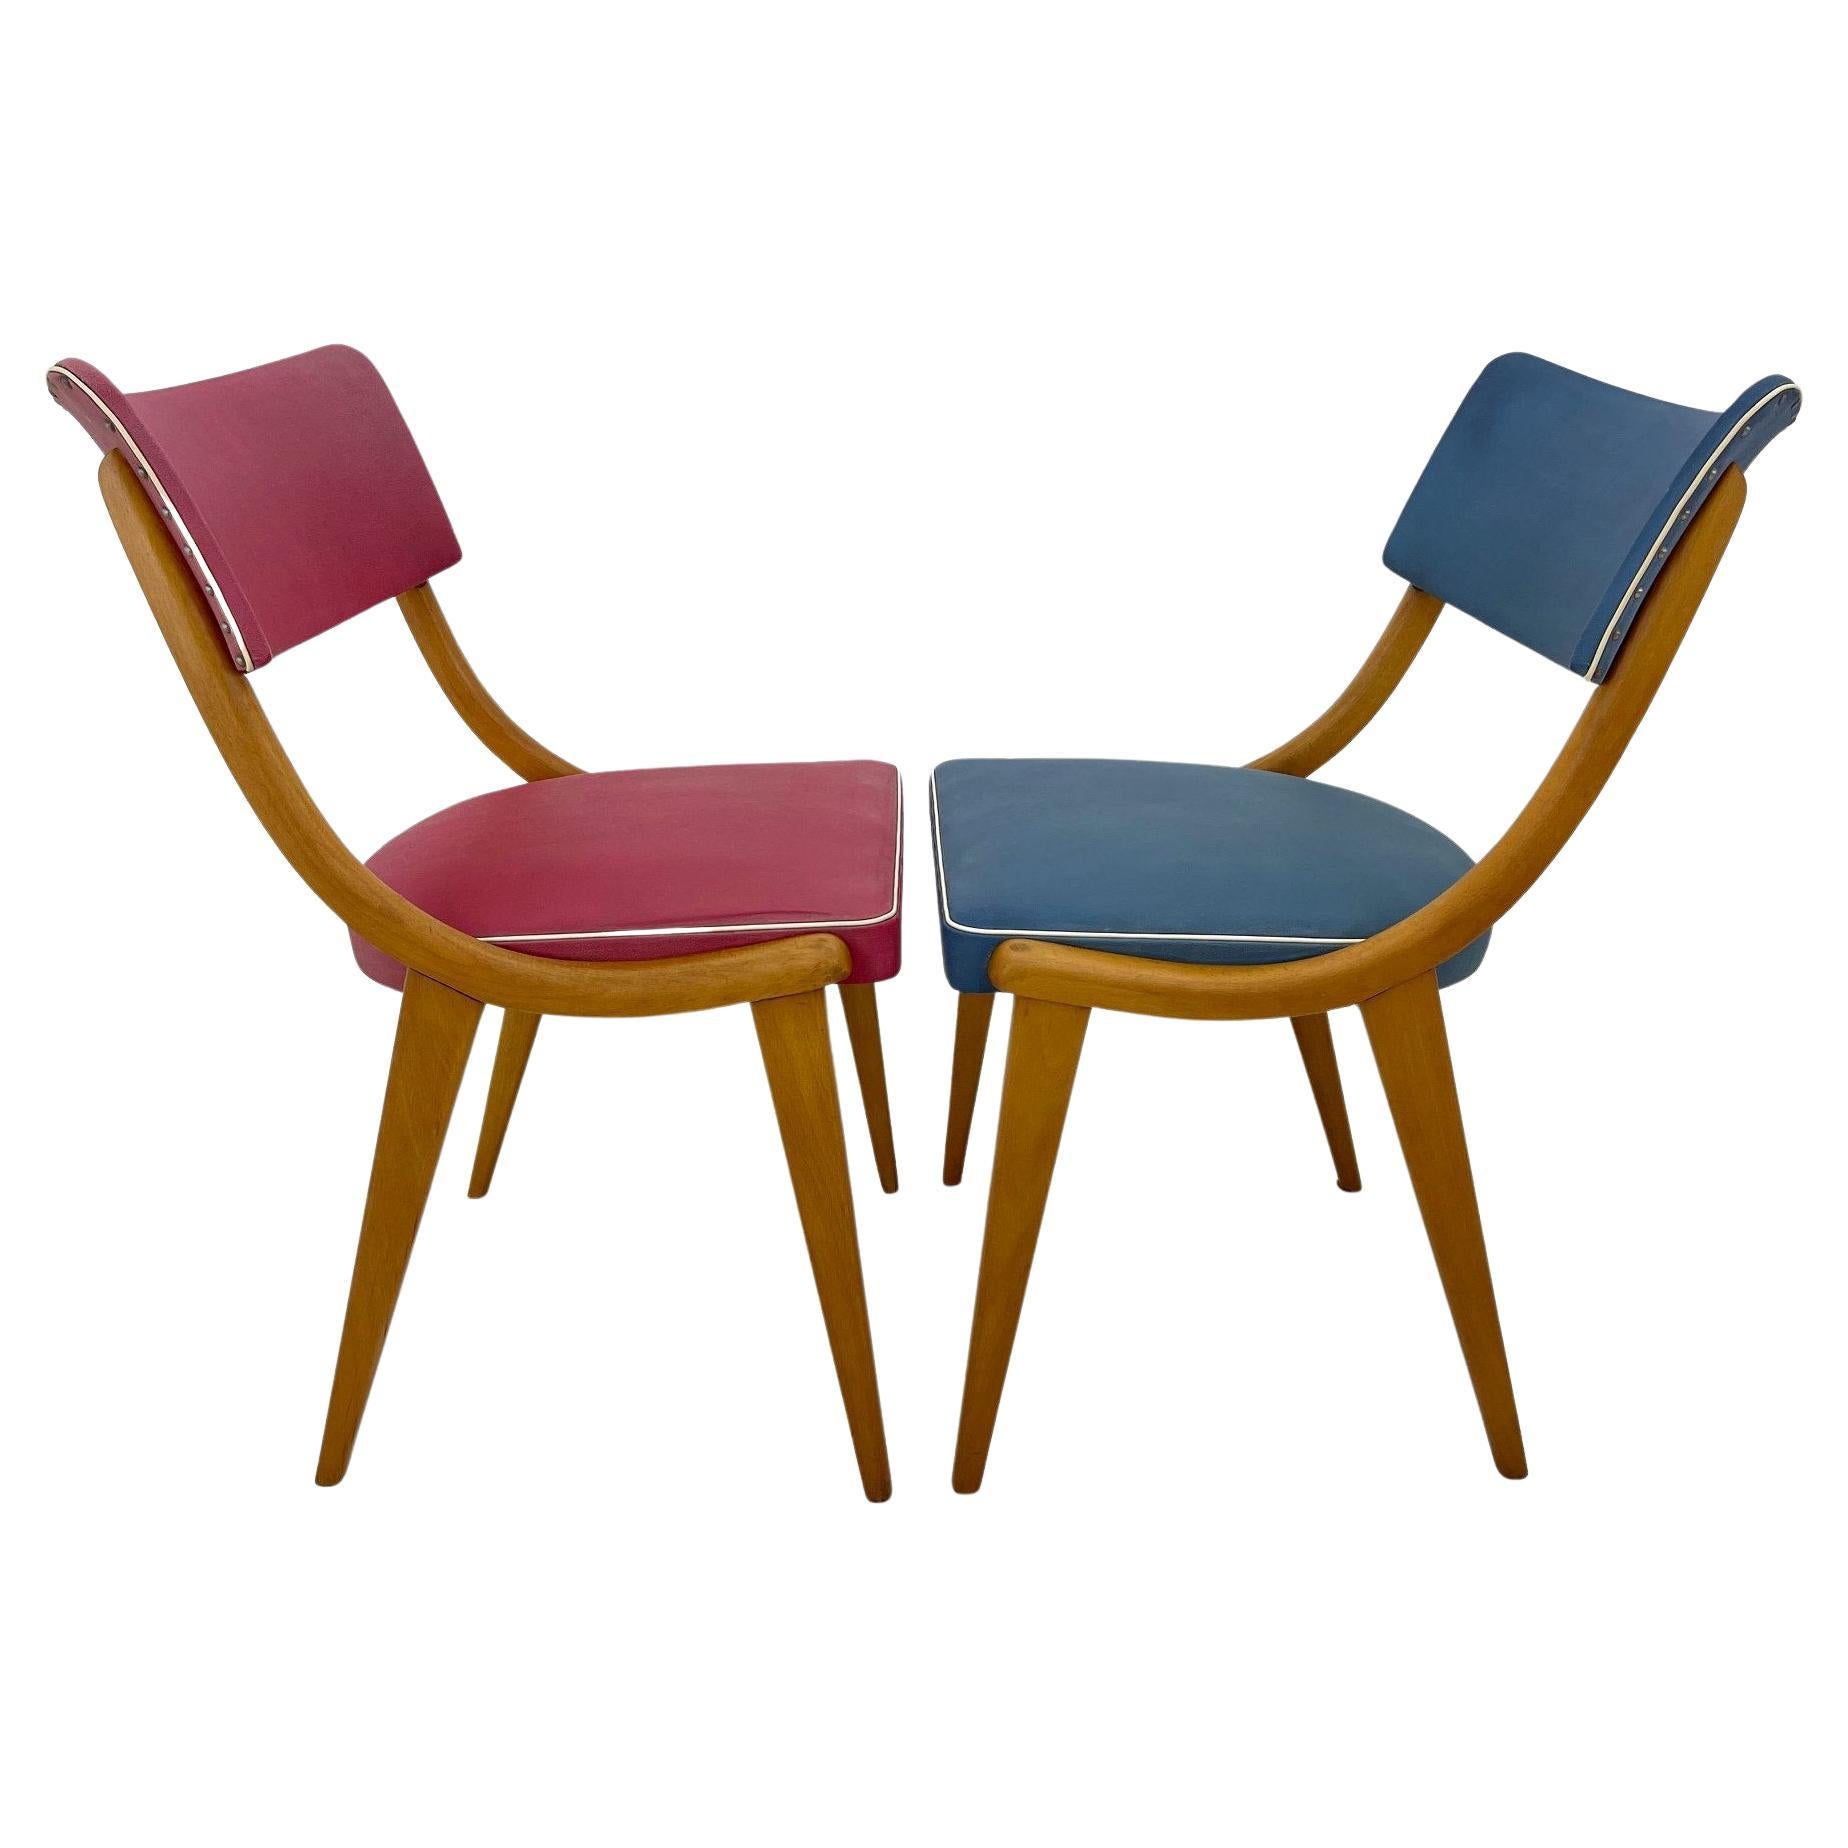 Set of 2 Colourful Vintage Chairs, Germany, 1960's For Sale